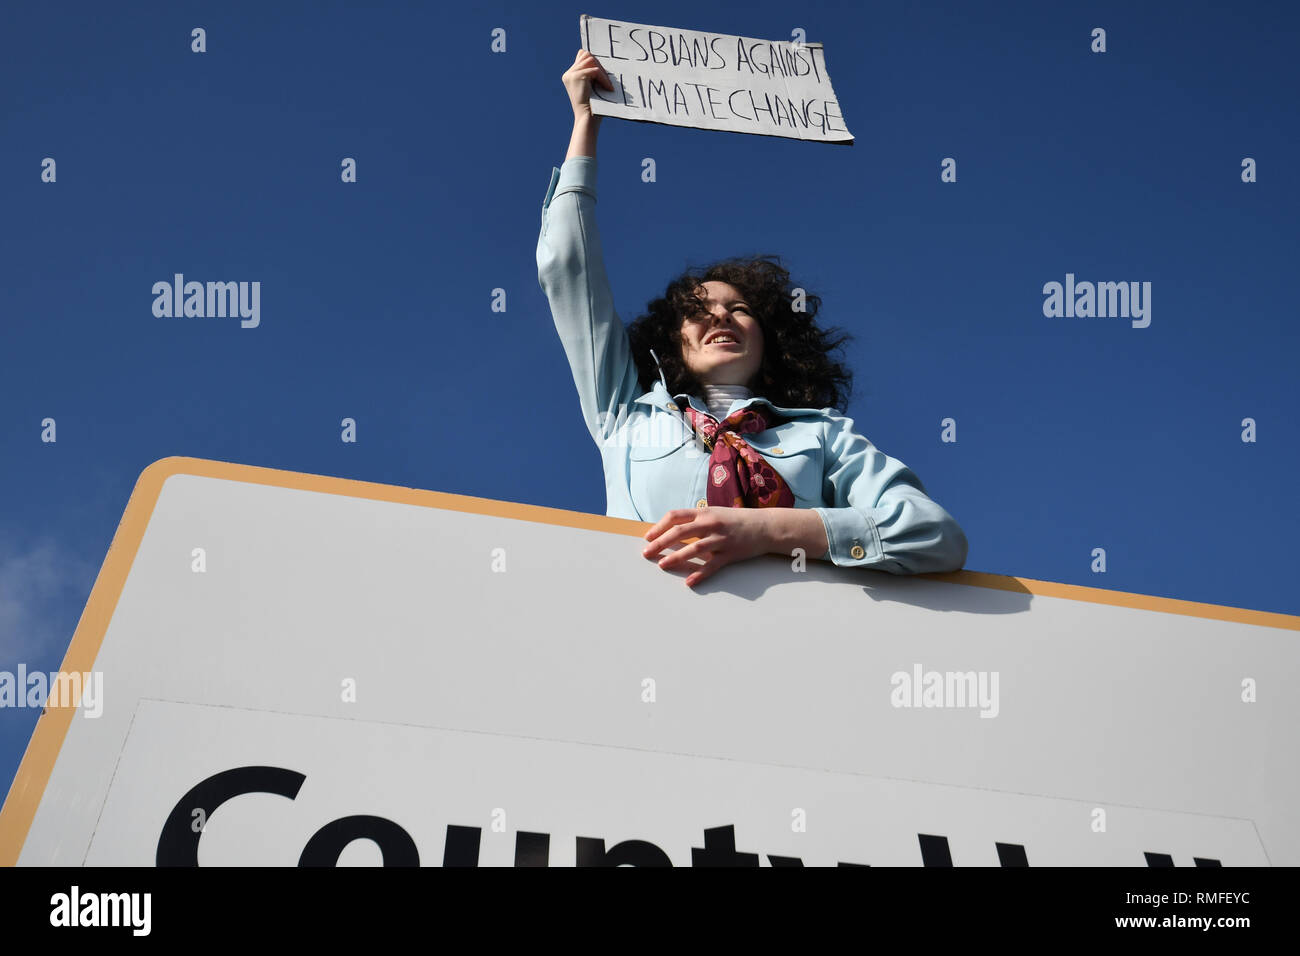 County Hall, Truro, Cornwall, UK. 15th Feb 2019. Students of all ages were outside Truro Country hall today striking for Climate change. Credit: Simon Maycock/Alamy Live News Stock Photo